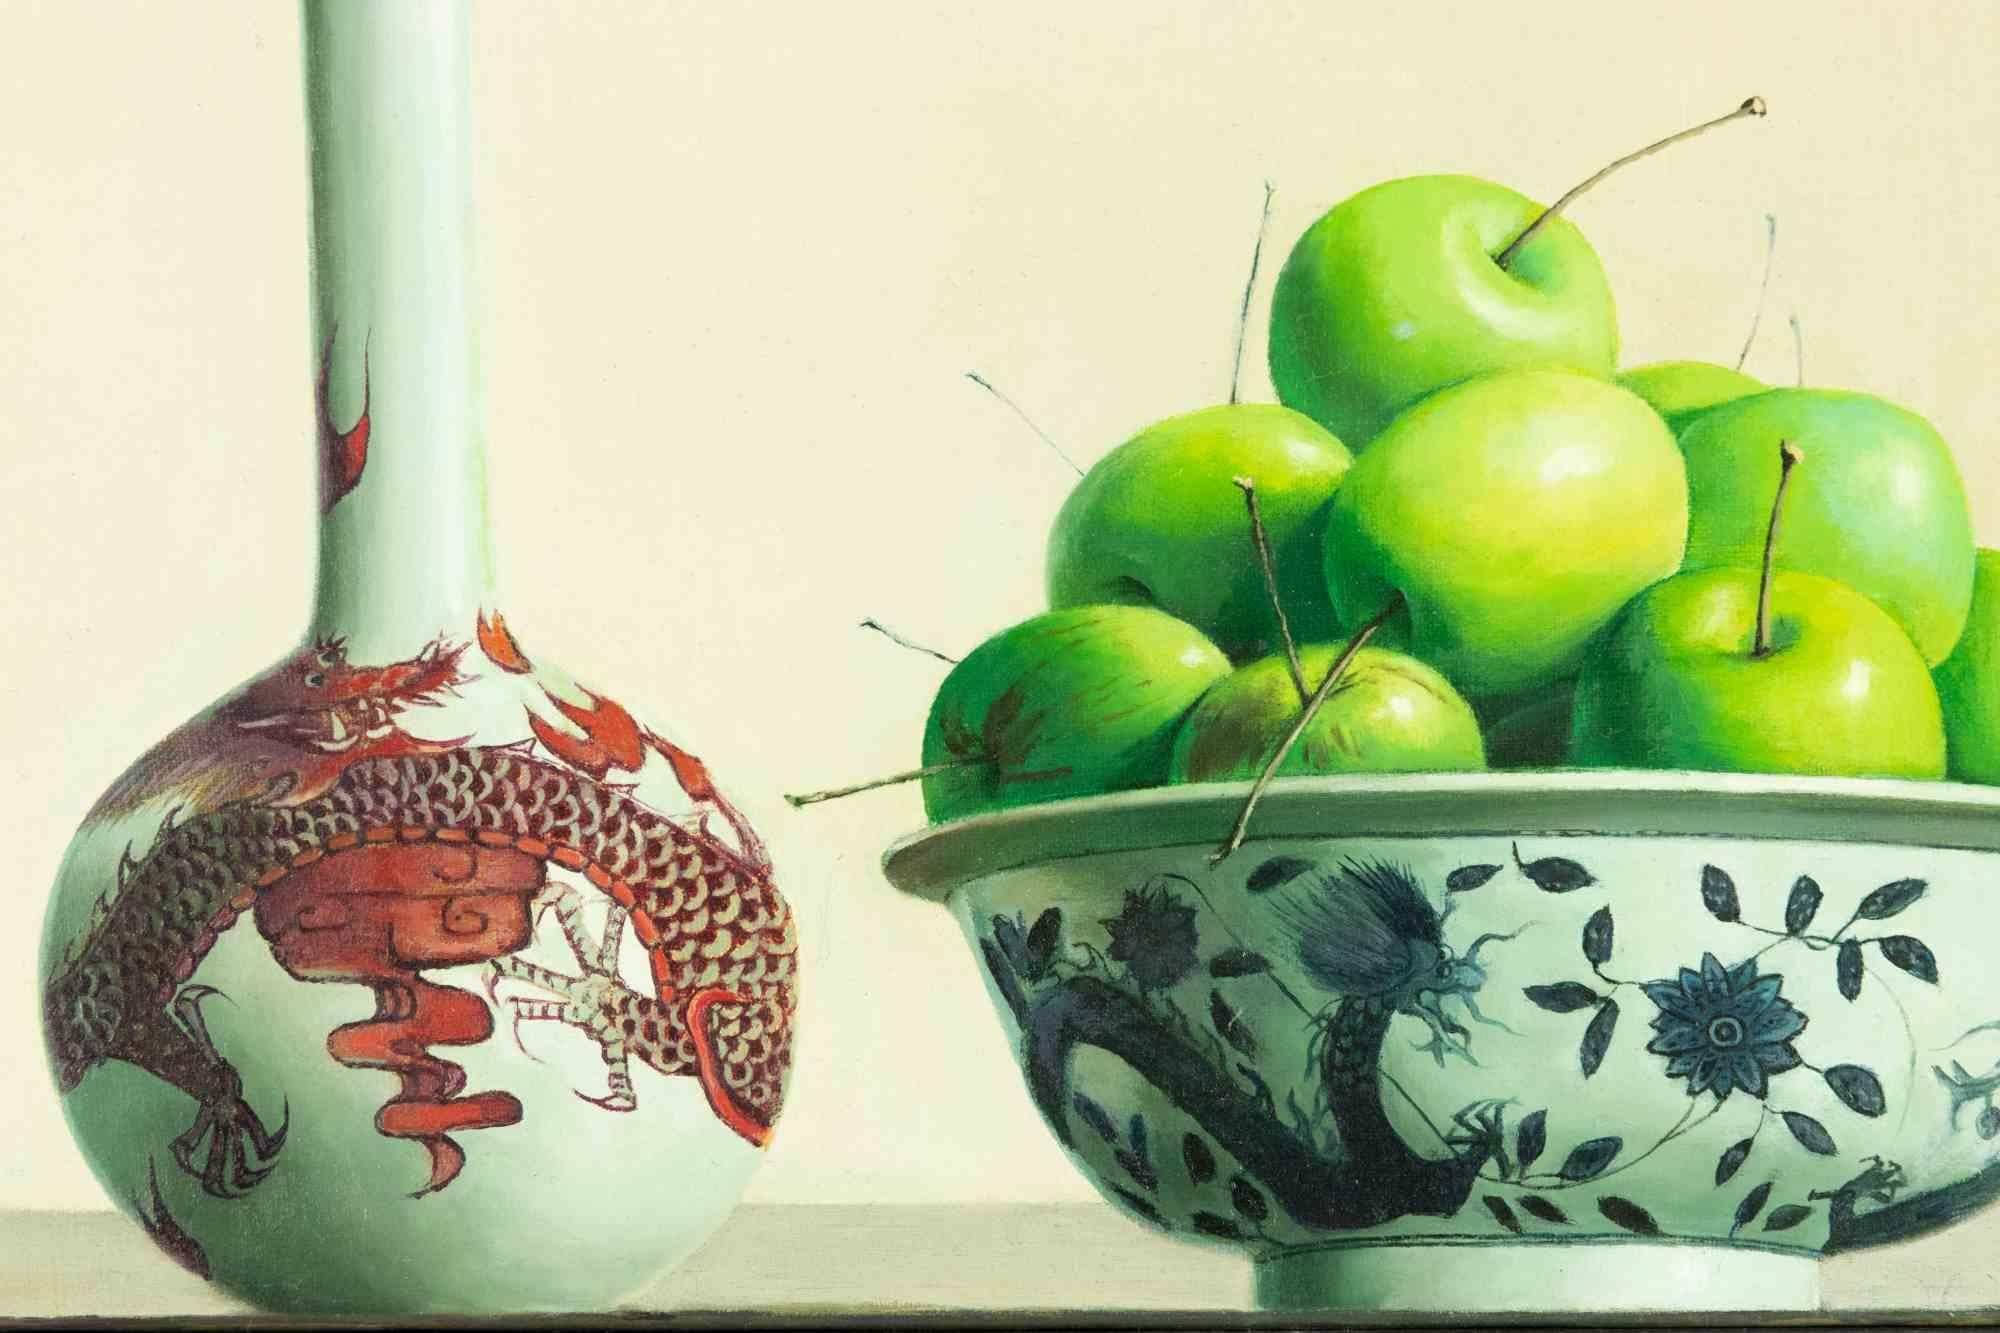 Still Life with Apples and Bottle  is an oil painting realized in 2006 by Zhang Wei Guang (Mirror).

Beautiful oil painting on canvas. 

Includes frame.

Hand-written notes on the back

Zhang Wei Guang , also called ‘mirror' was born in Helong Jang,